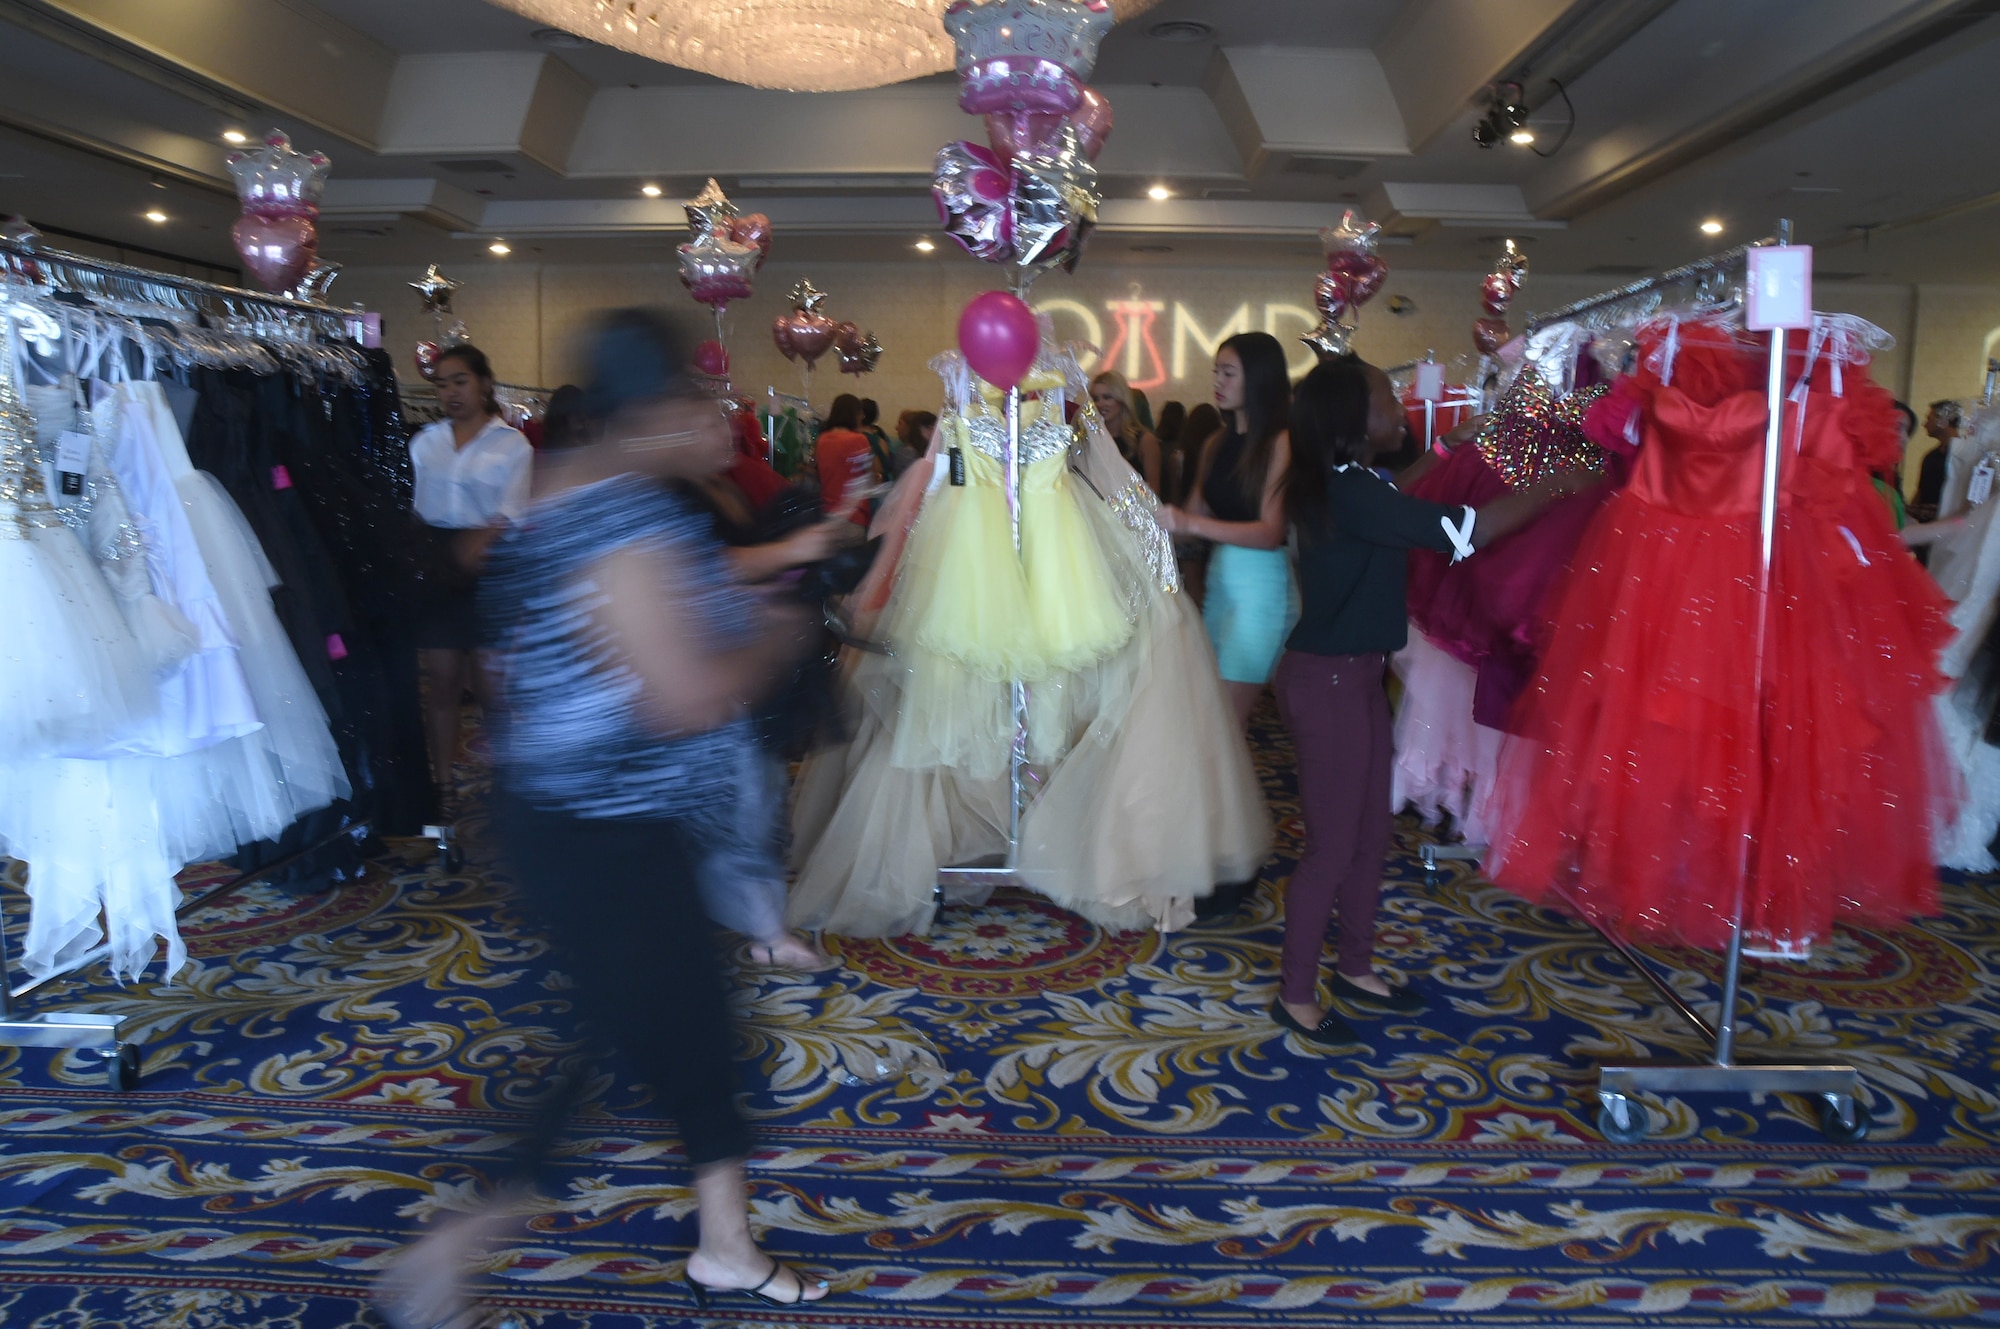 Women scramble to find dresses to try on during the USO sponsored Operation That’s My Dress event in Las Vegas, Aug. 30, 2015. More than 1500 dresses in multiple sizes- valued between $400 and $1200- were donated to over 800 active duty females, spouses, and teenage daughters as a thank you for their service and sacrifice. (U.S. Air Force photo by Tech. Sgt. Nadine Barclay)